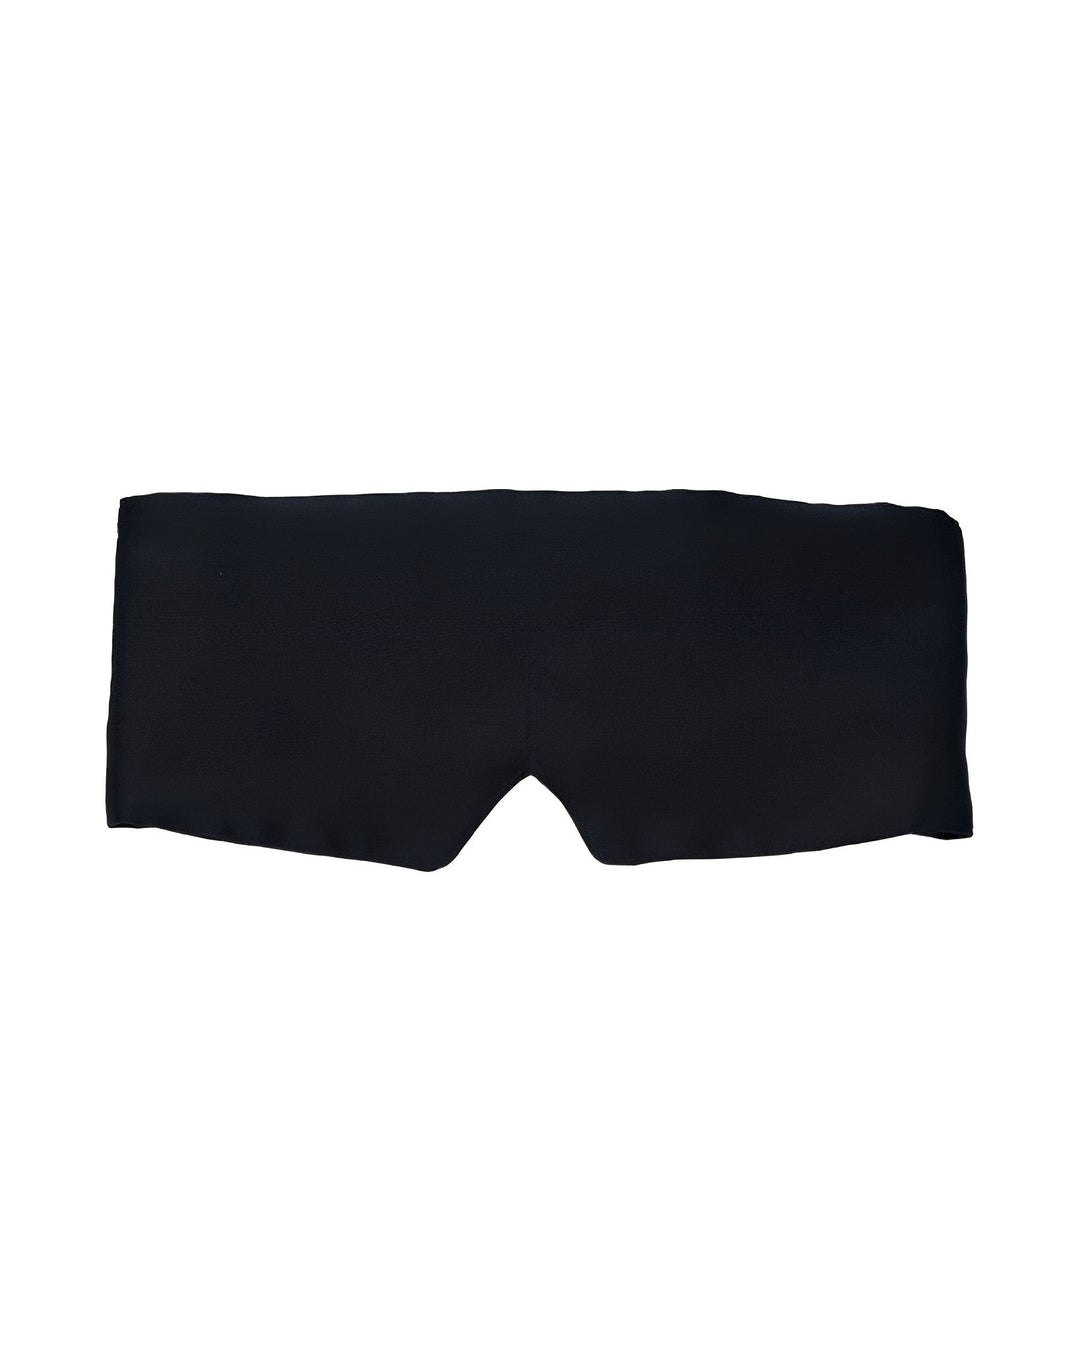 19 Momme Silk sleep eye mask mulberry blackout breathable enlarged and thickened - SusanSilk